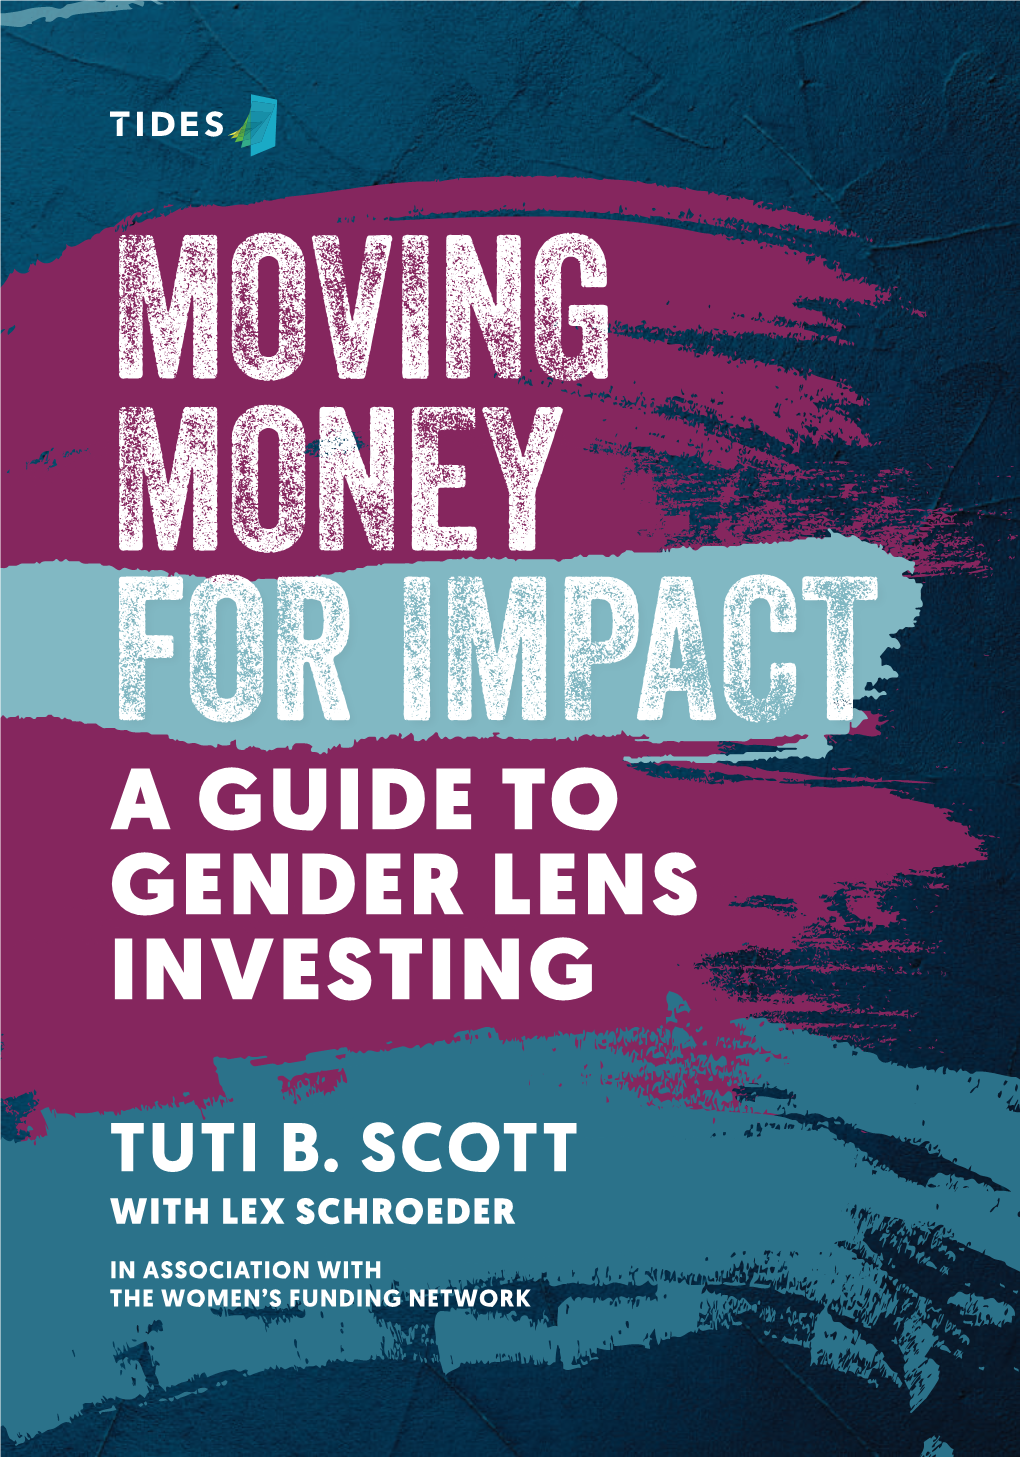 A Guide to Gender Lens Investing